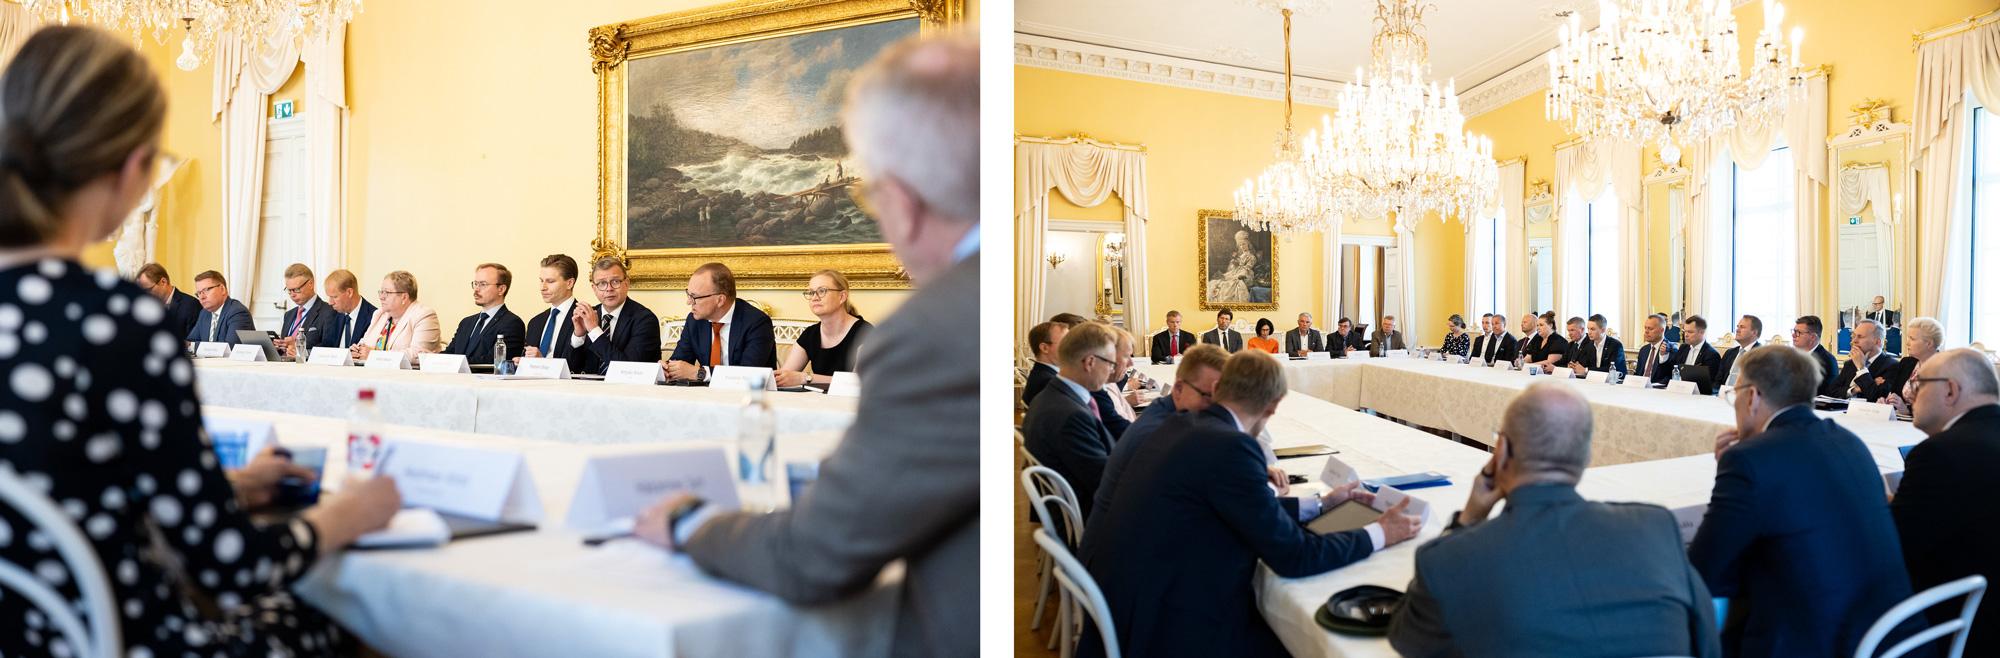 Kirsi Hedman sits together with members of Finnish Government to discuss defense industry related topics.